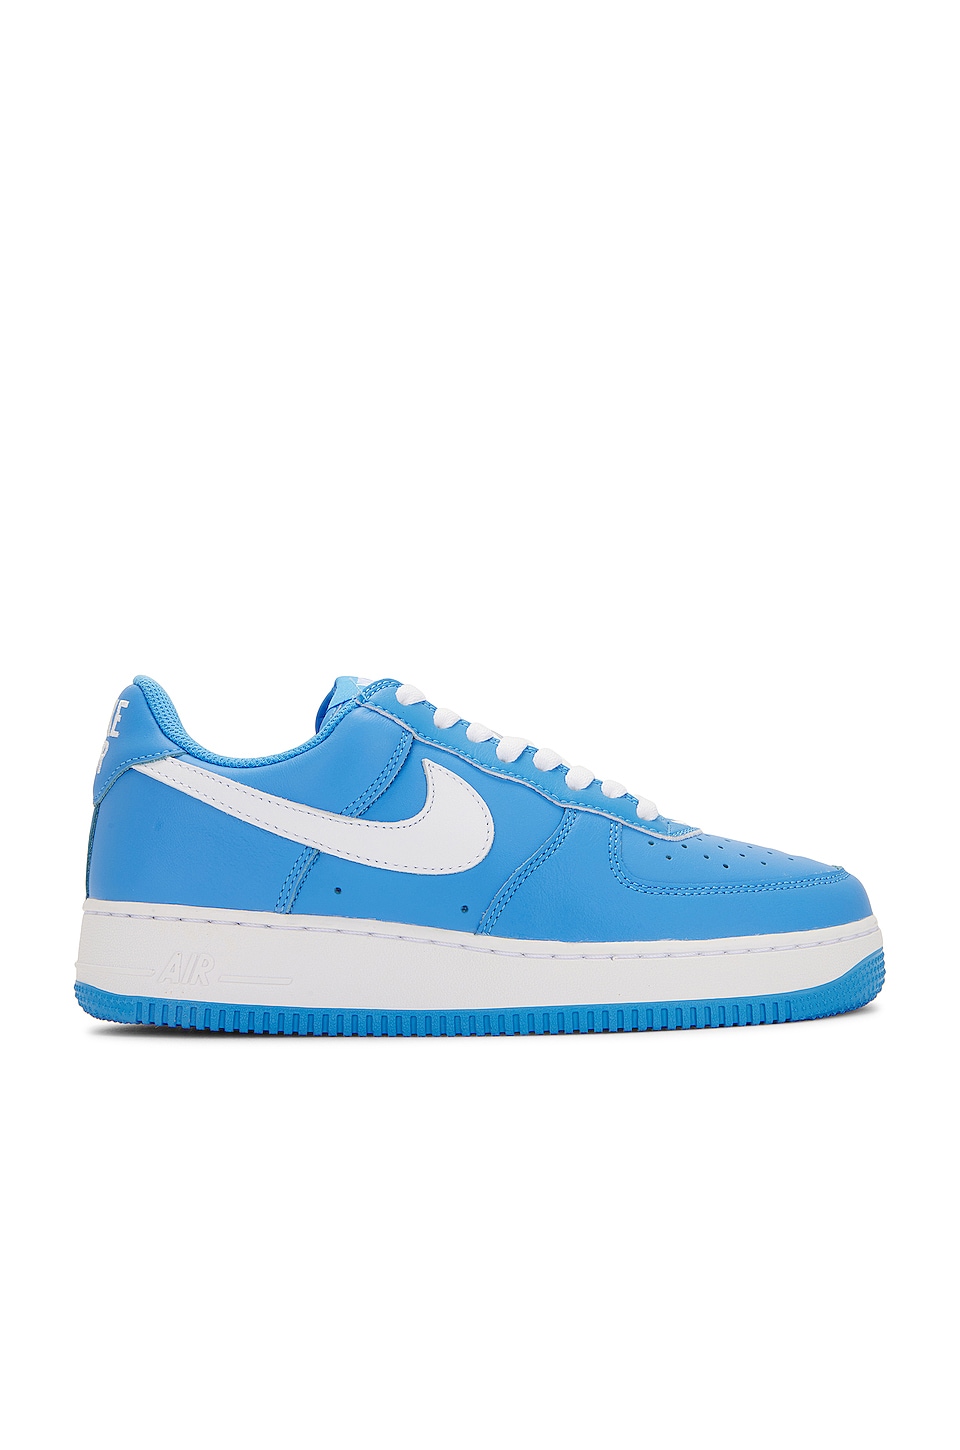 Nike Air Force 1 Low Retro in Baby Blue | REVOLVE